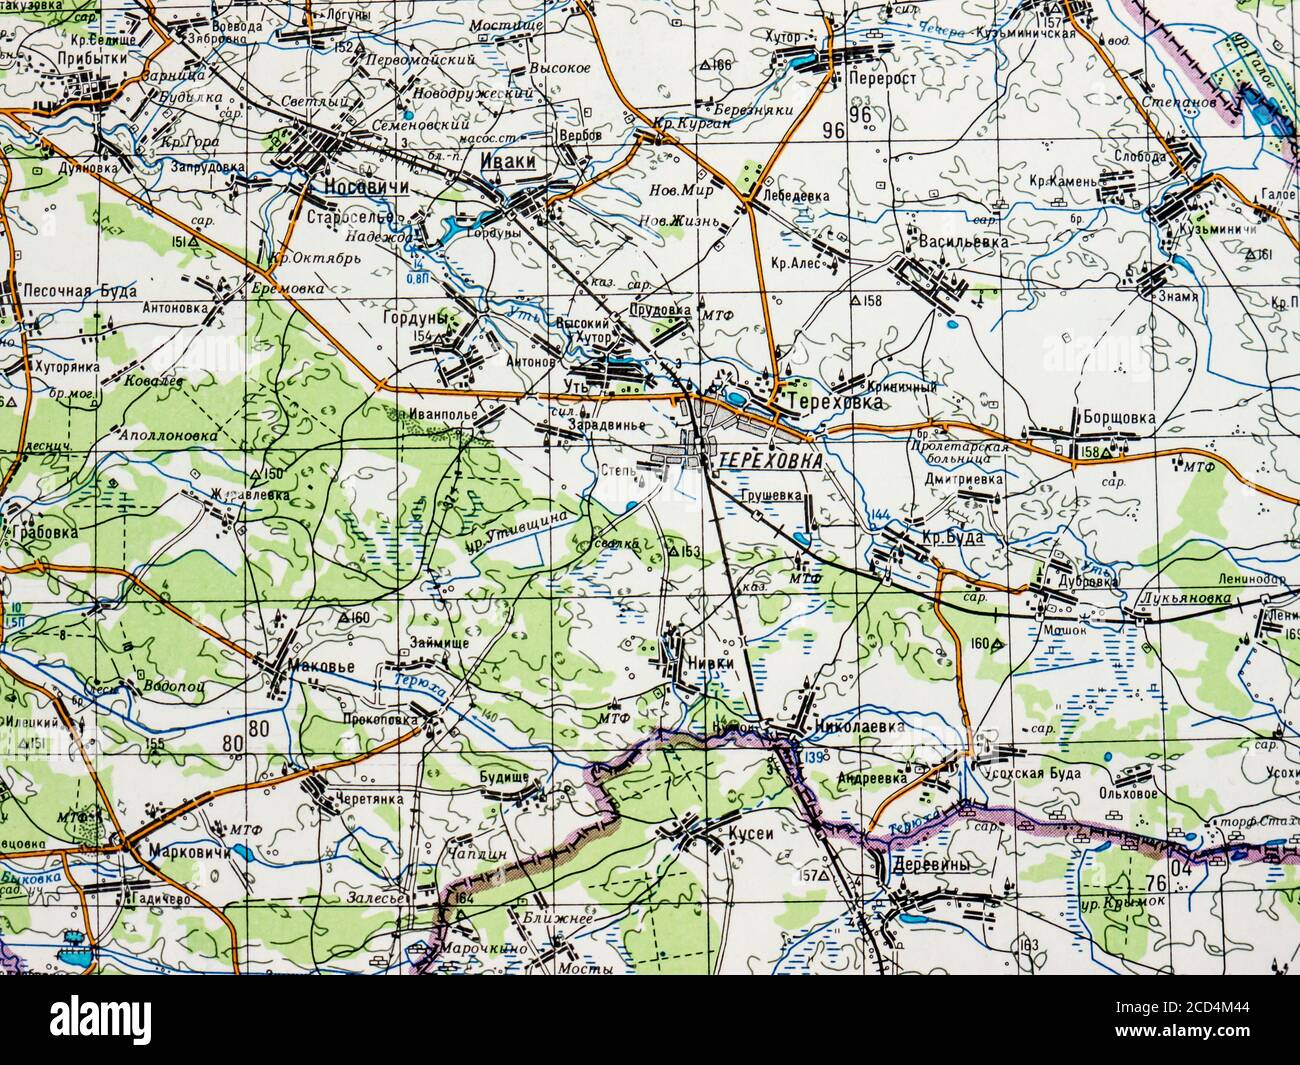 Topographic map of the city of Novozybkov and its environs. Stock Photo